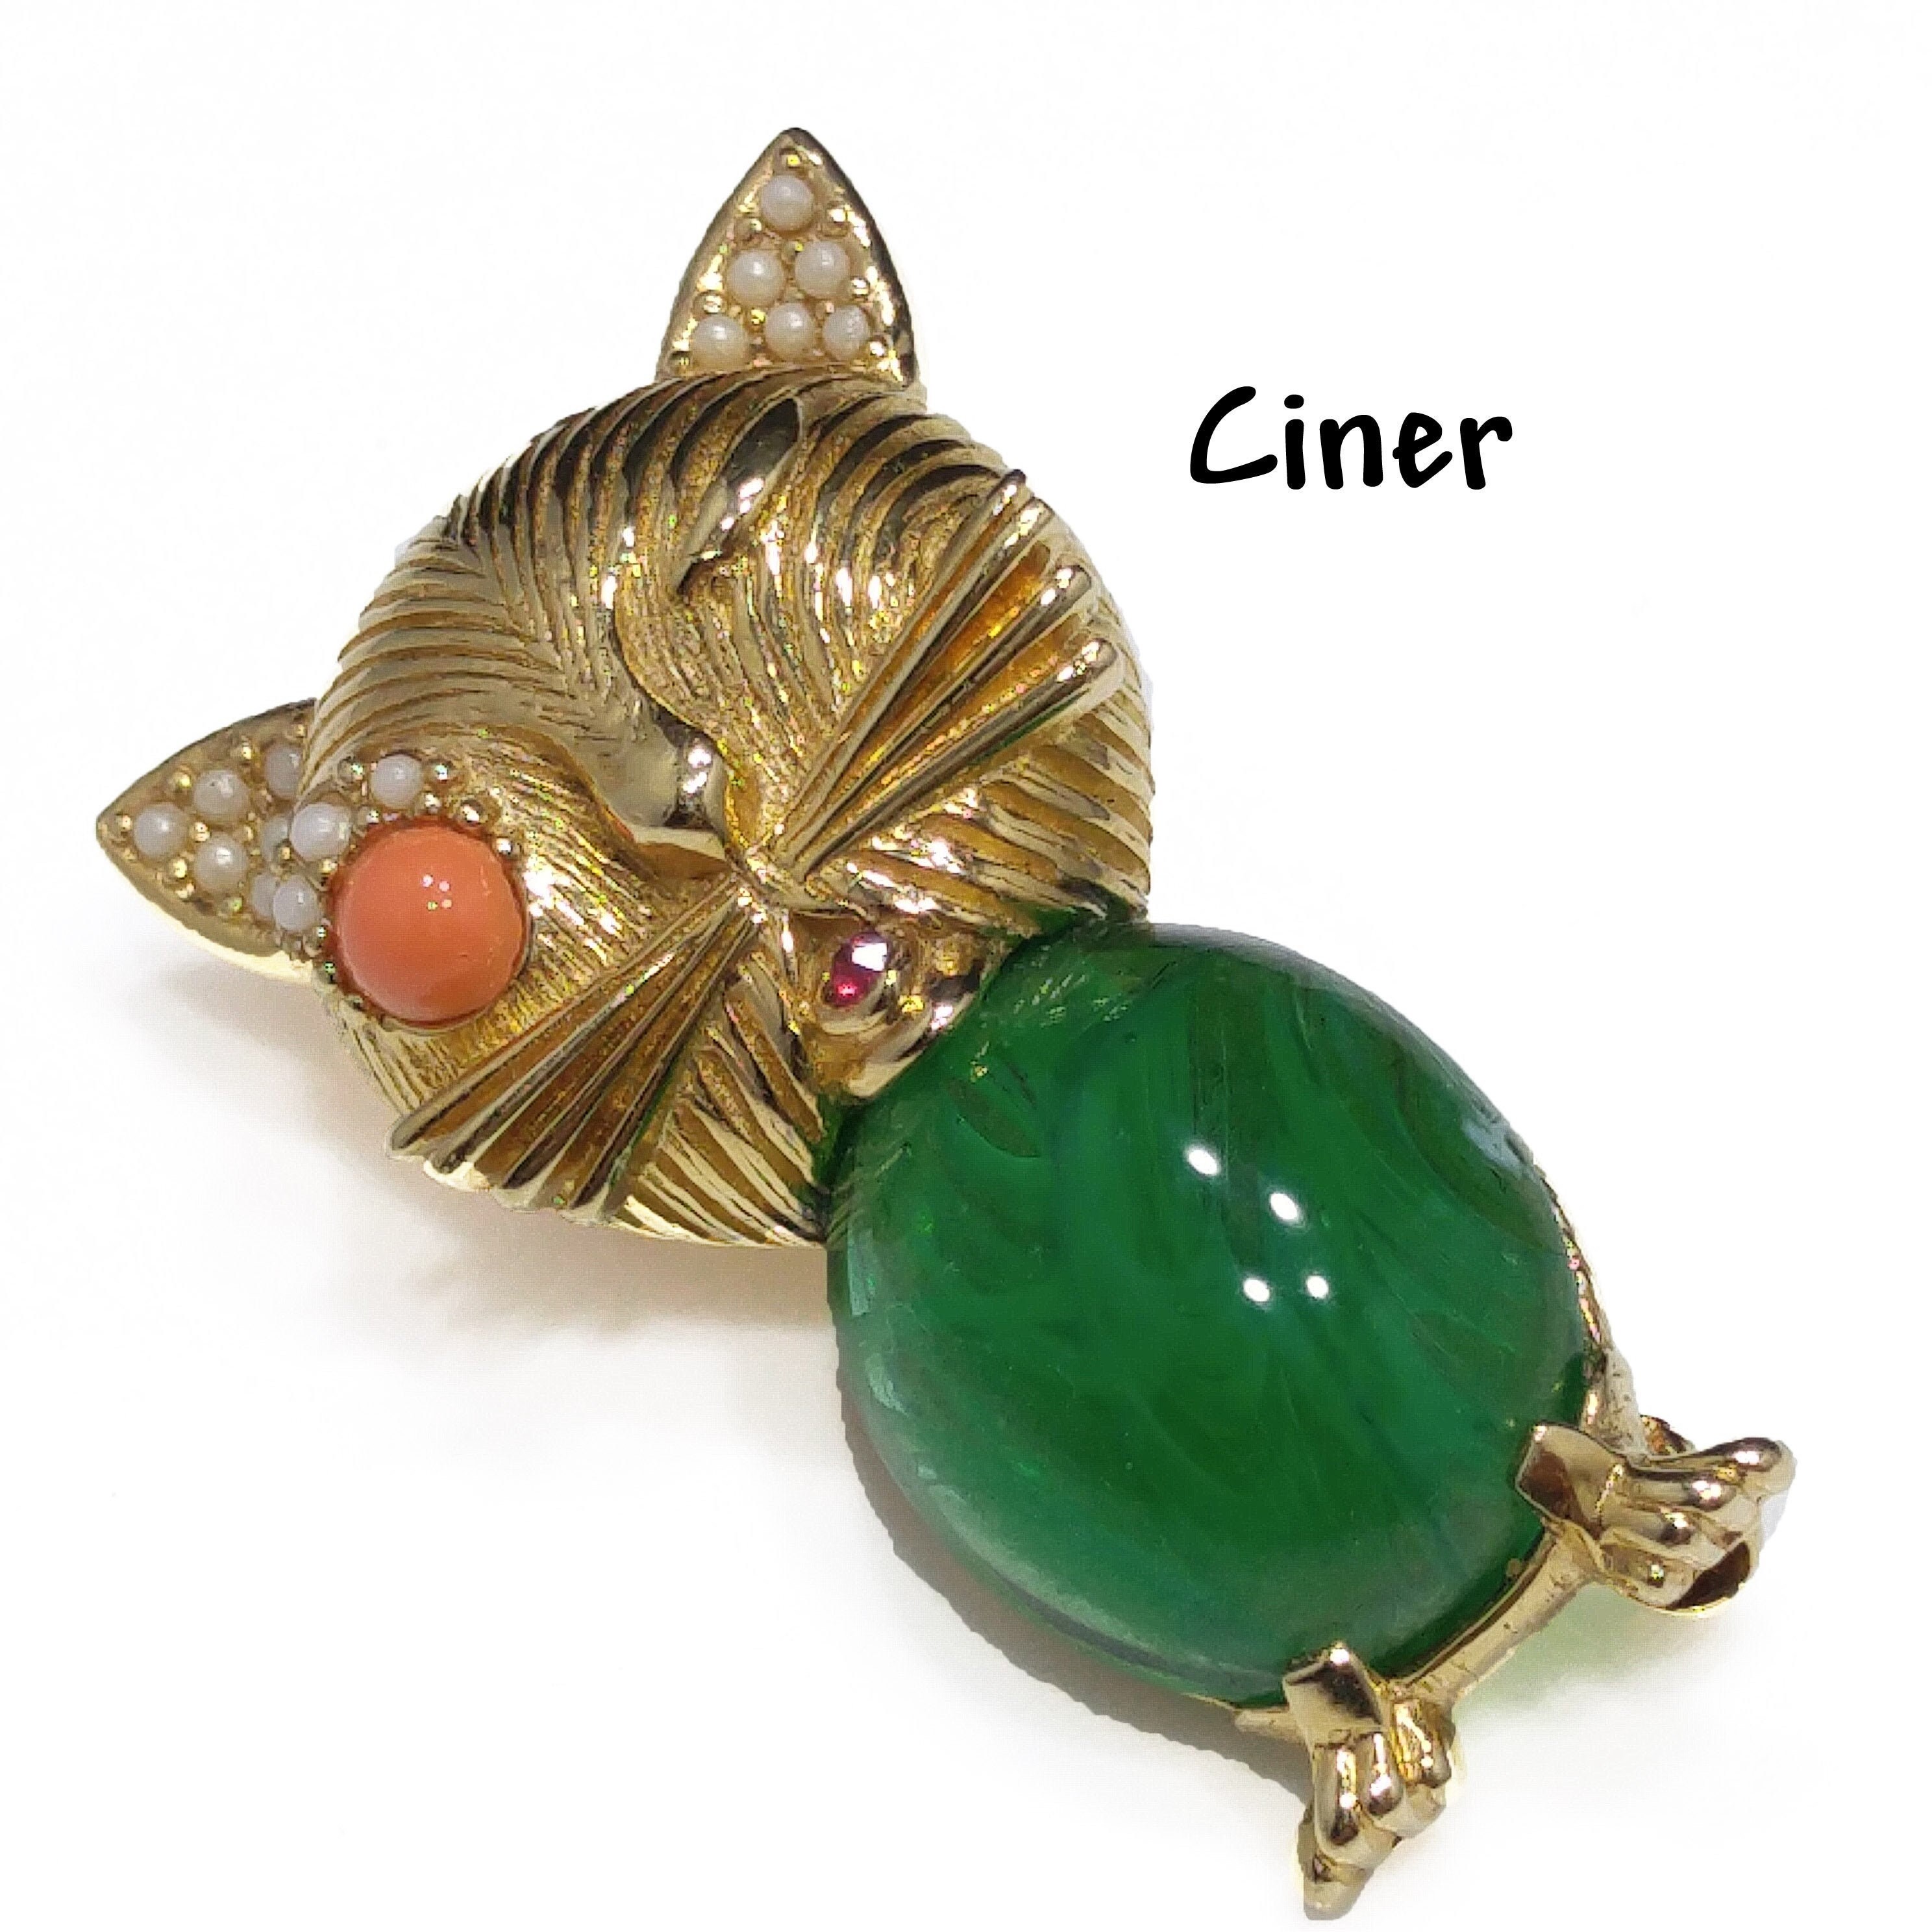 Ciner Winking Cat Lucite Belly Brooch Green Lucite 1950s 